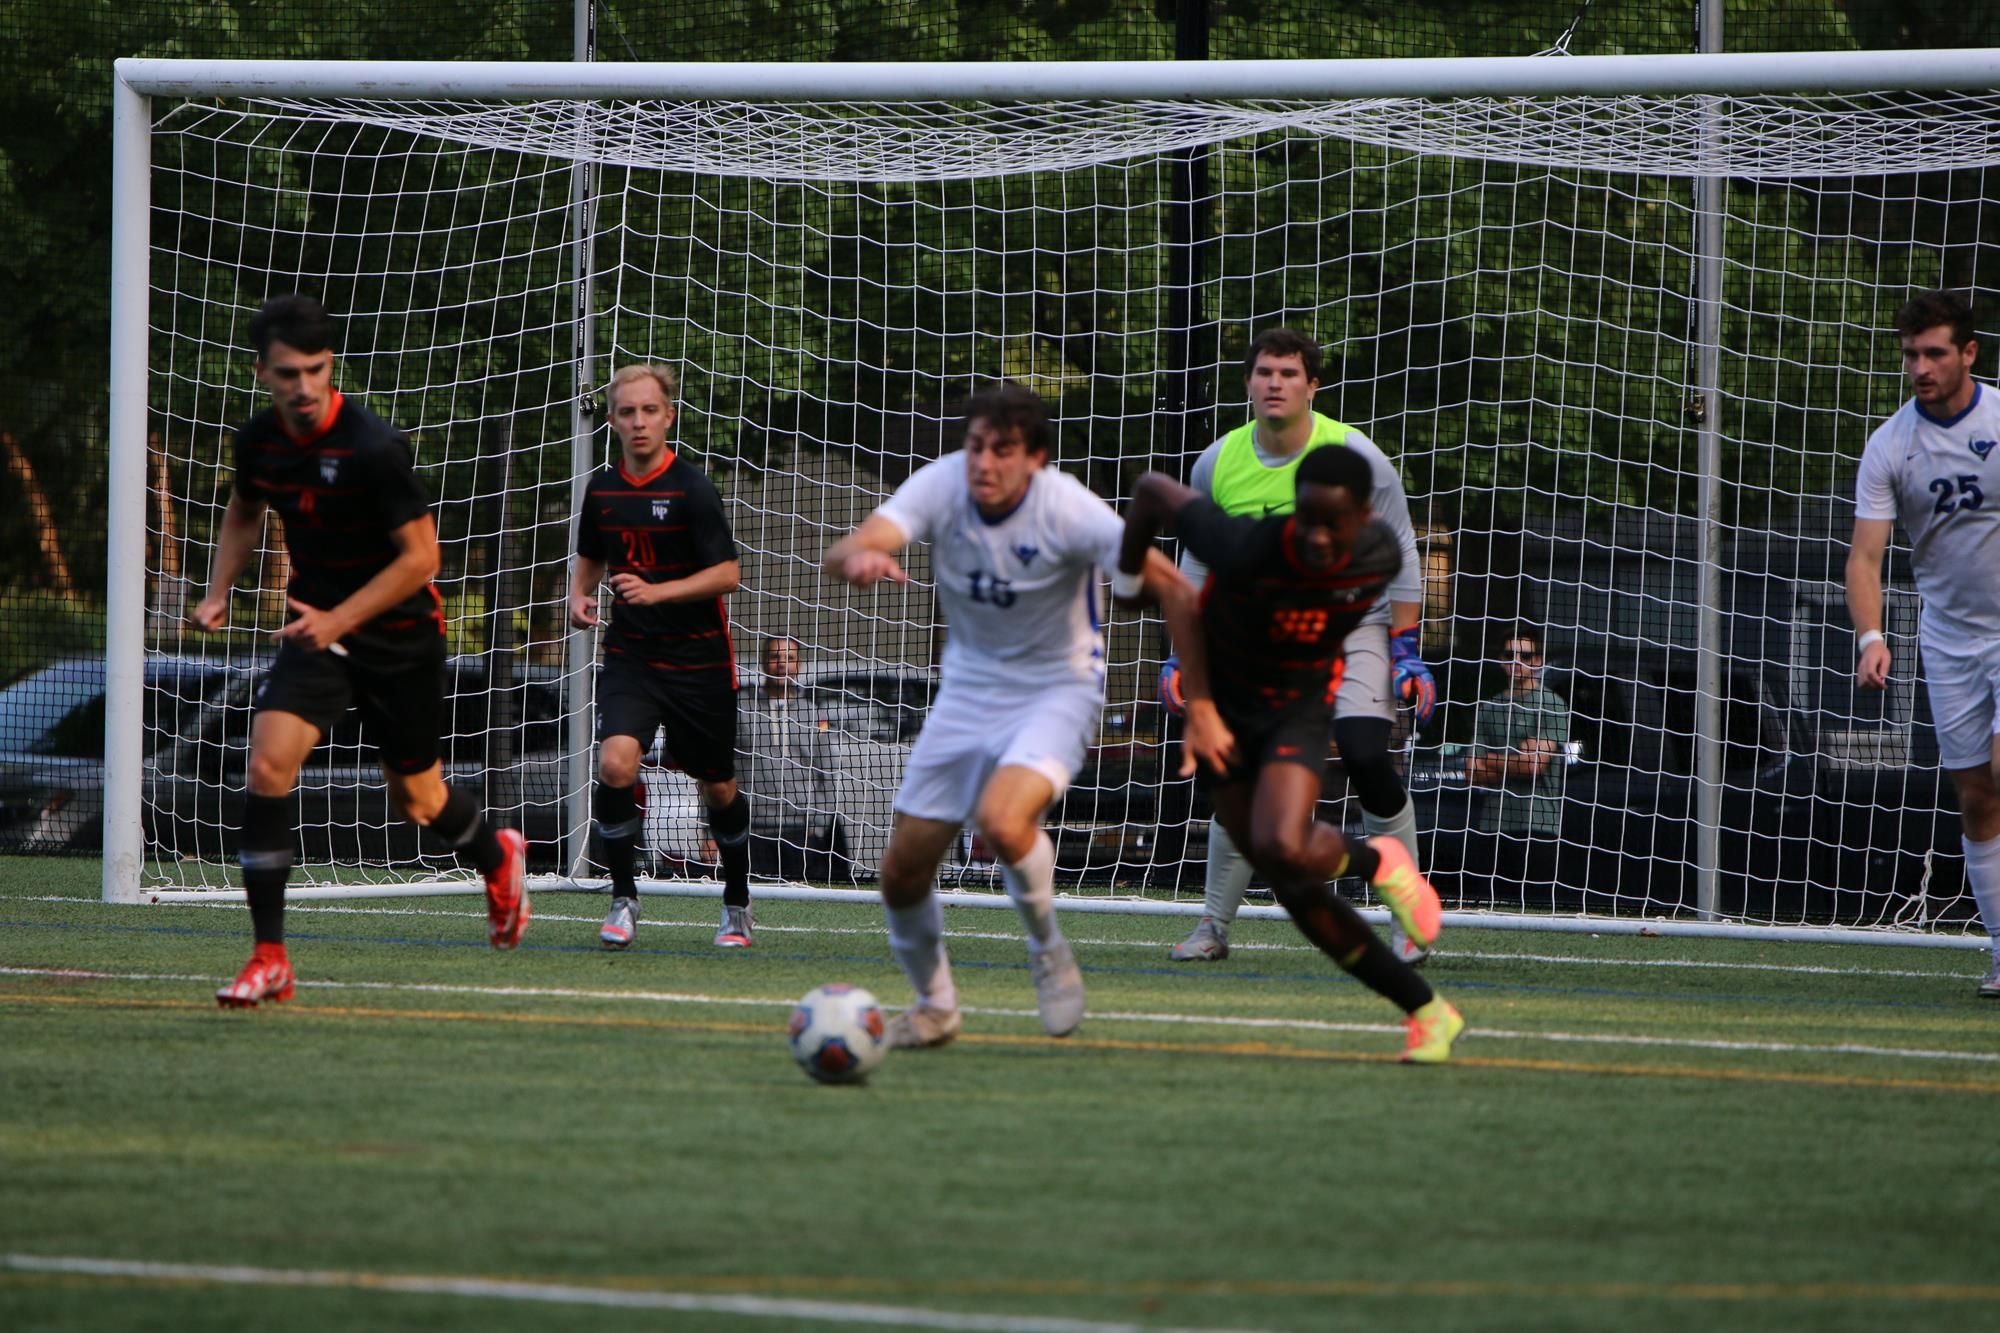 Photo by Cabrini Athletics. Matt Duddy competing in a soccer game.